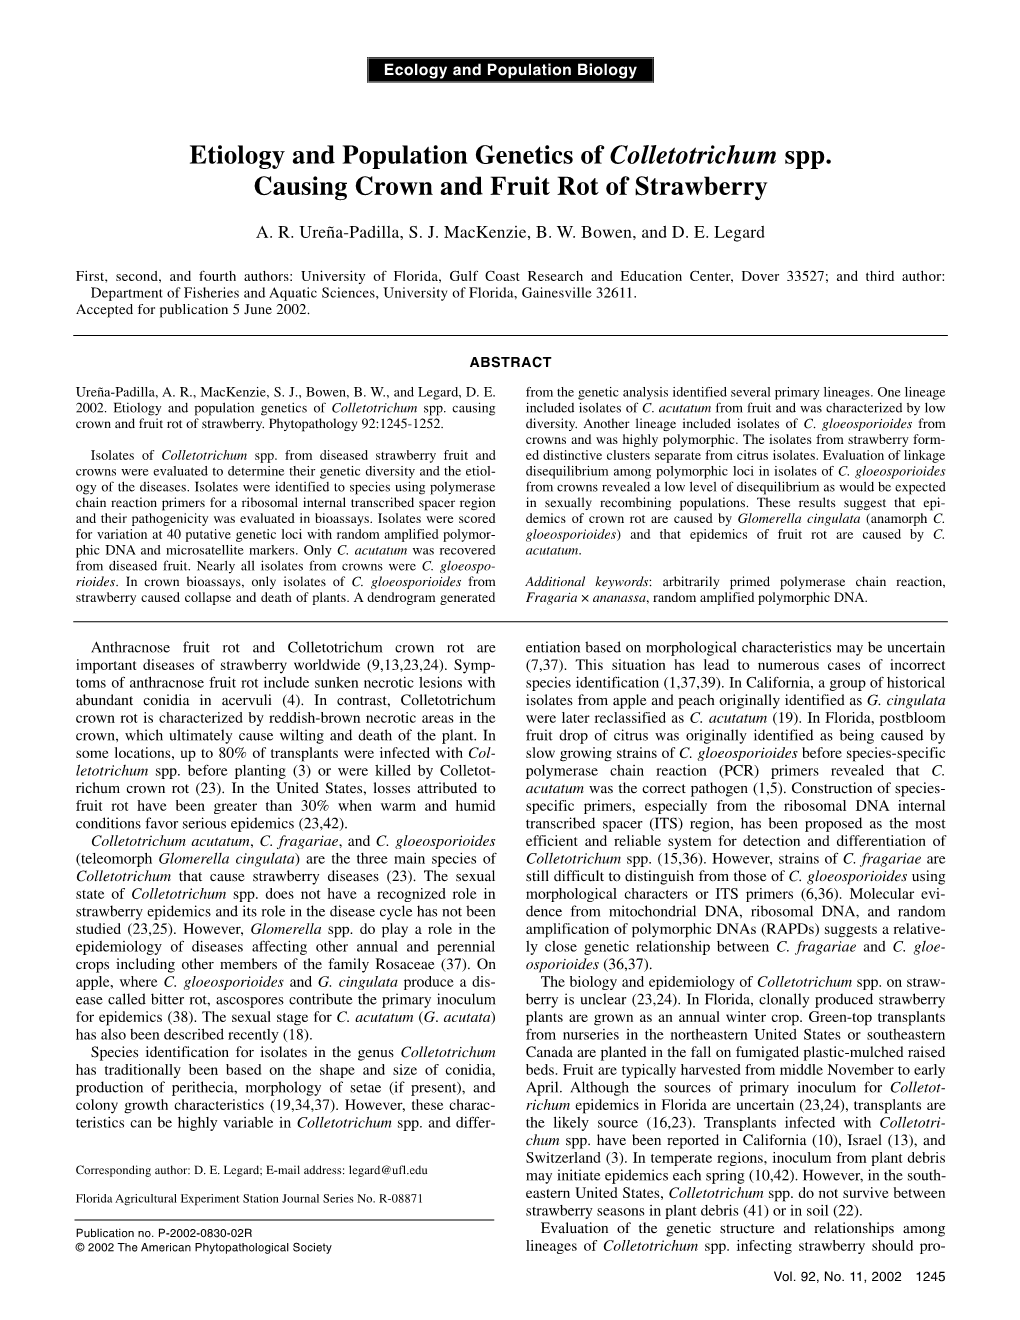 Etiology and Population Genetics of Colletotrichum Spp. Causing Crown and Fruit Rot of Strawberry